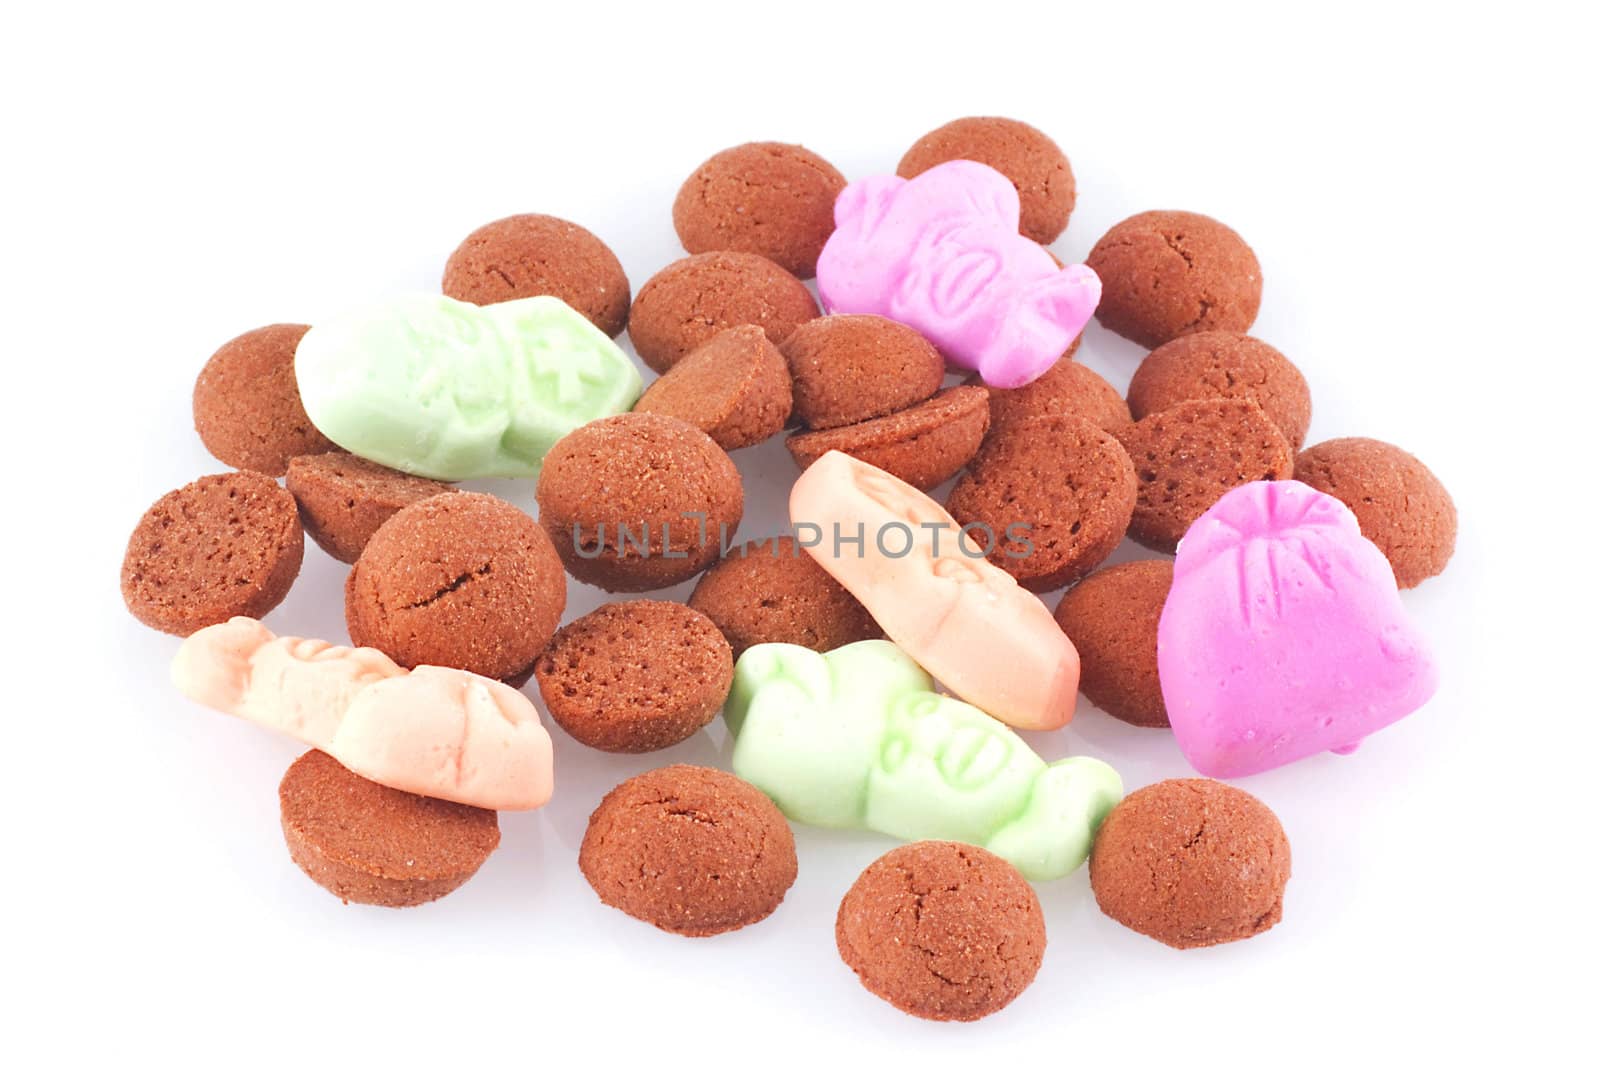 Close up of some candy eaten in Holland during a dutch holiday called sinterklaas; isolated on white.